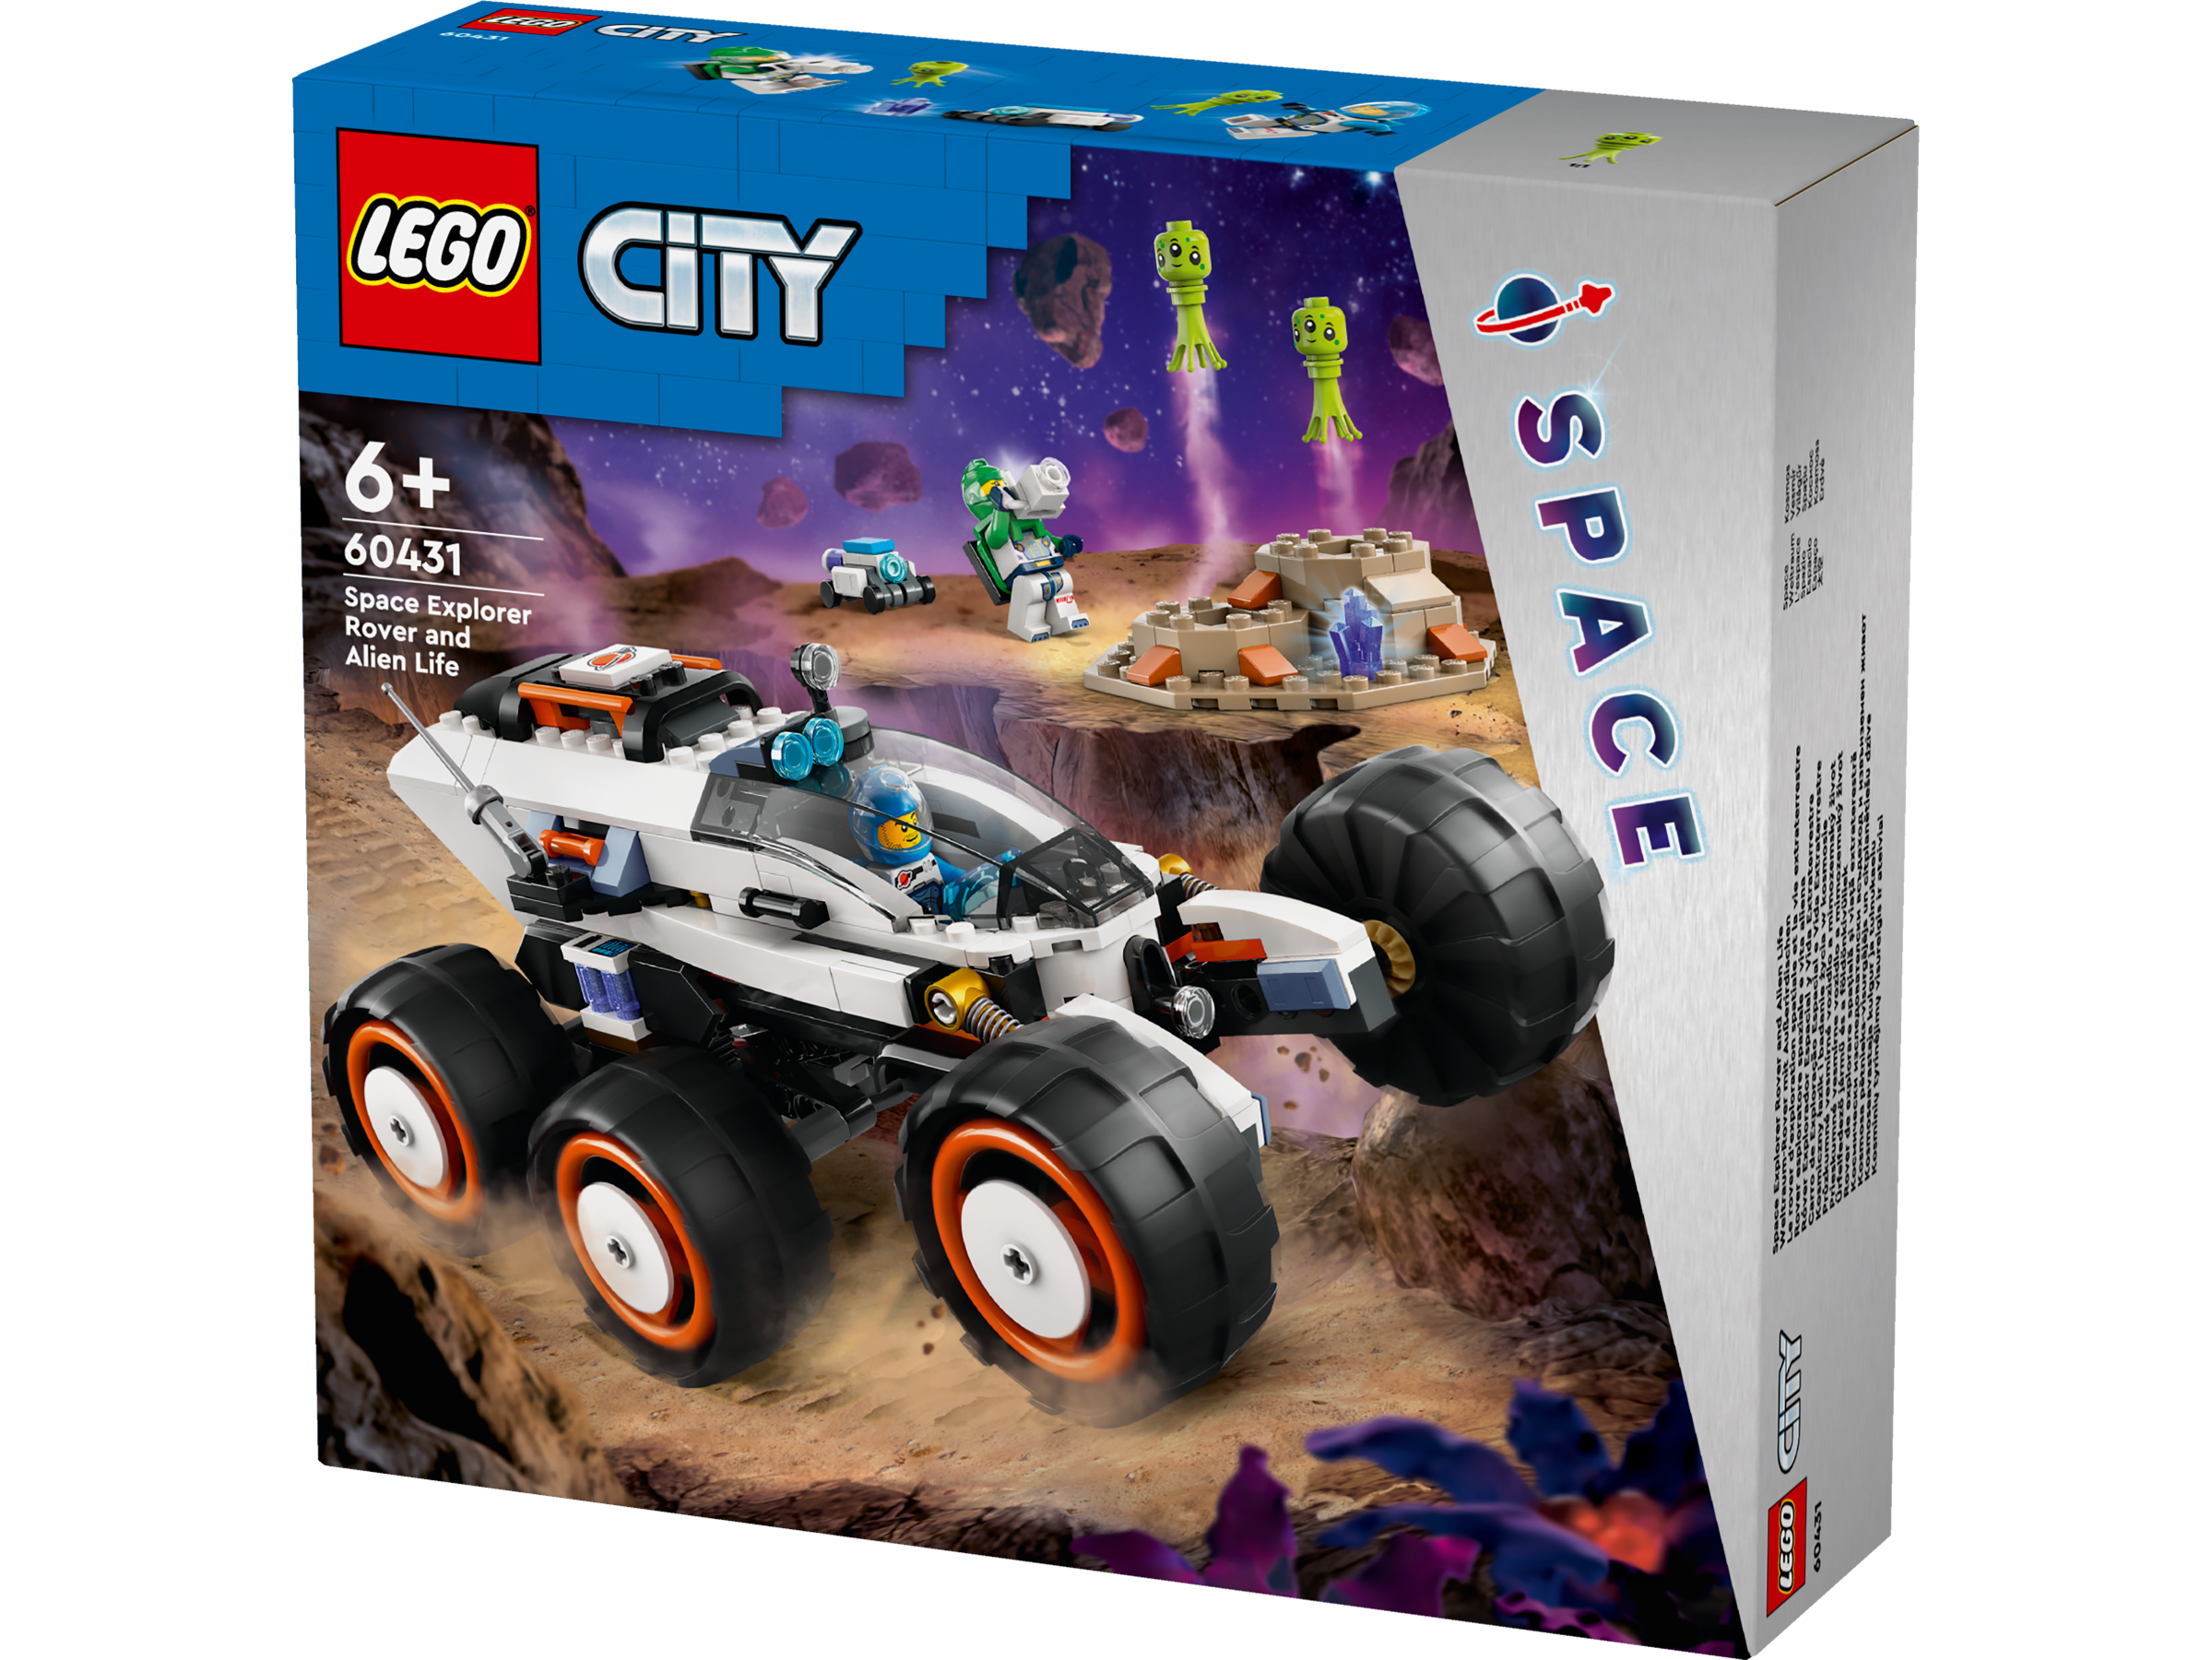 Lego 60431 Space Explorer Rover and Alien Life